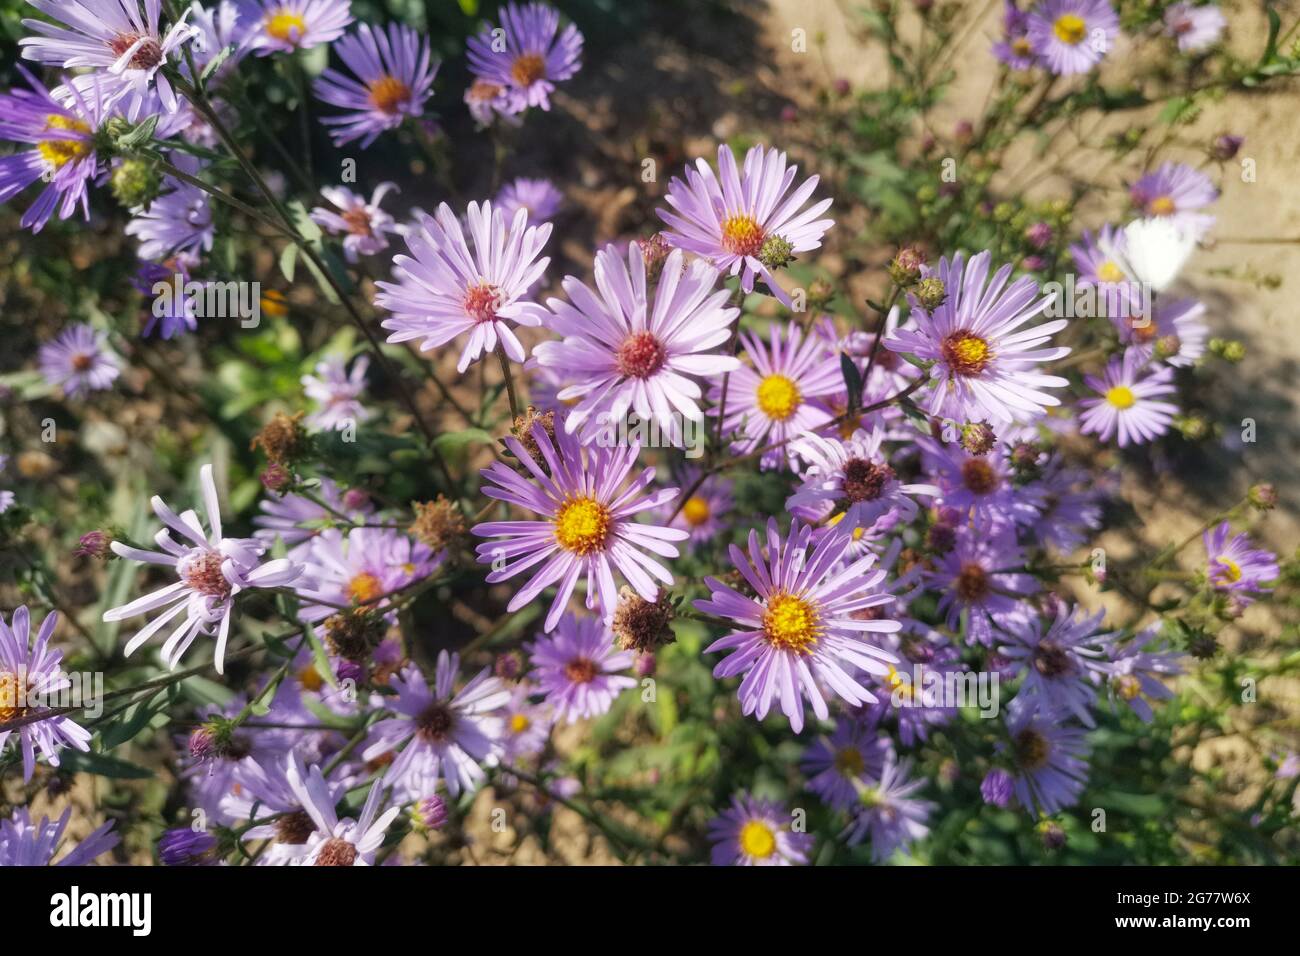 Closeup of purple wood asters, commonly known as the eurybia divaricata, in a hot summer field Stock Photo